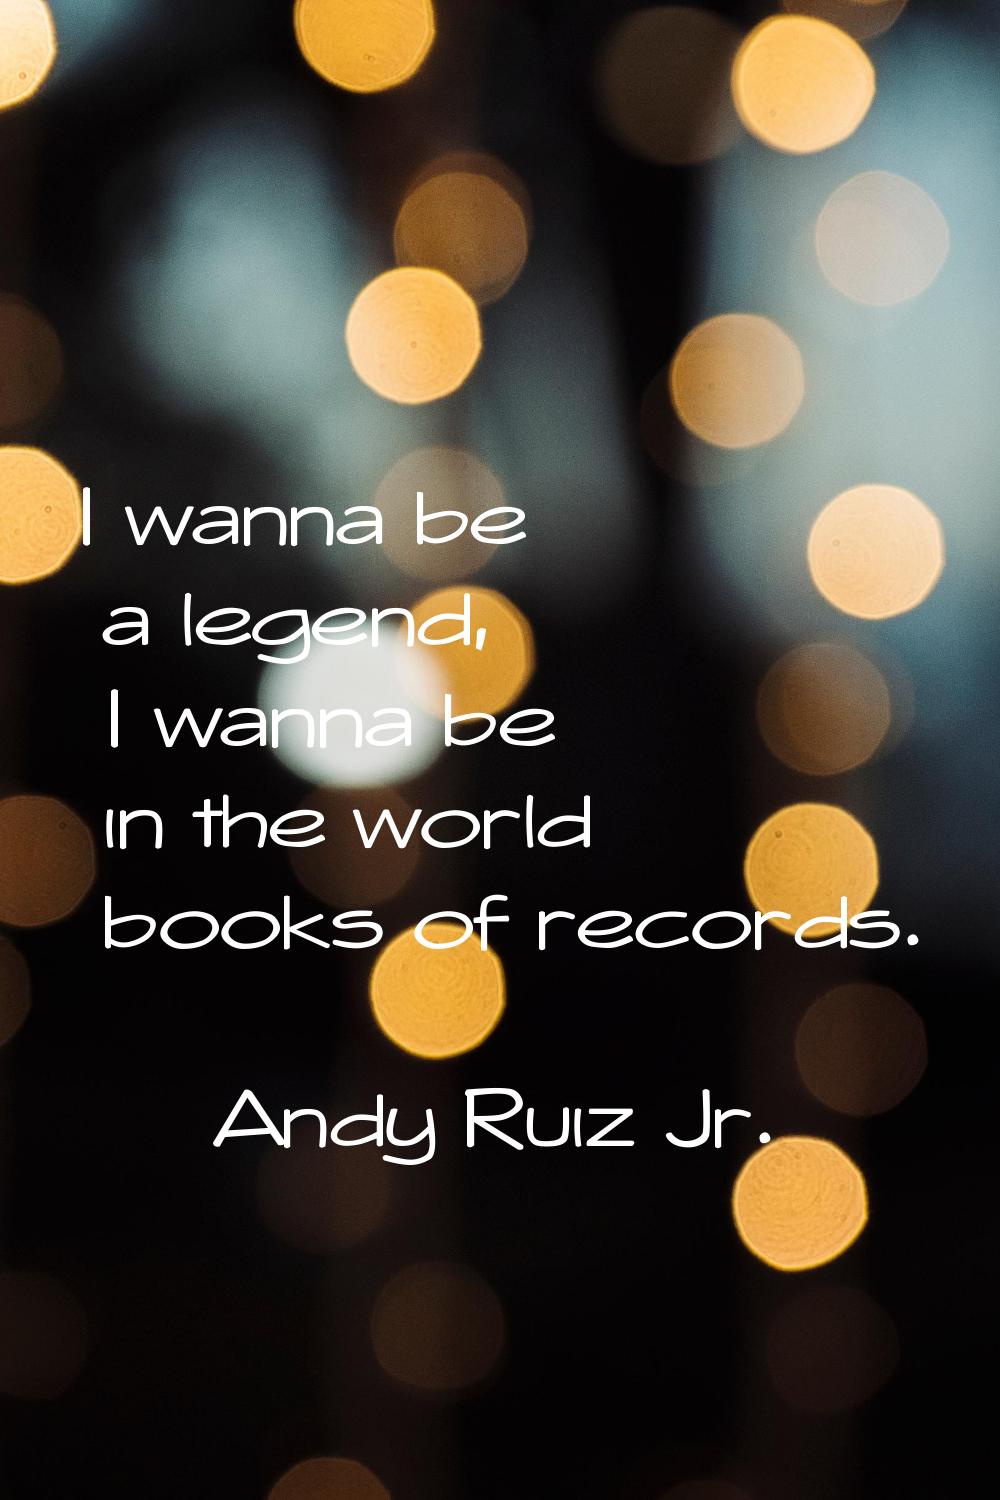 I wanna be a legend, I wanna be in the world books of records.